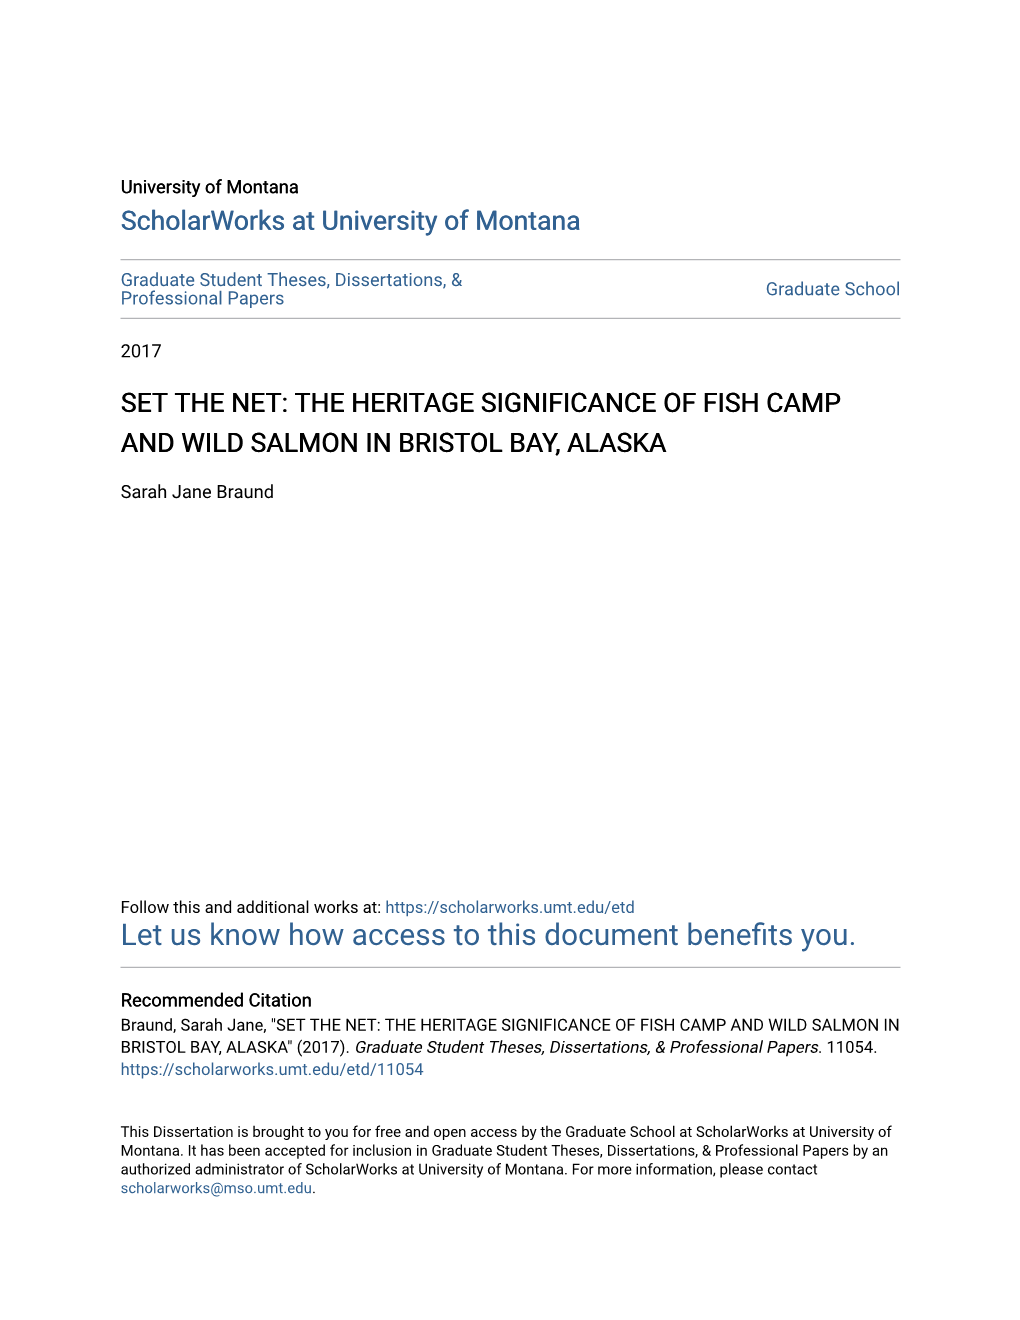 Set the Net: the Heritage Significance of Fish Camp and Wild Salmon in Bristol Bay, Alaska